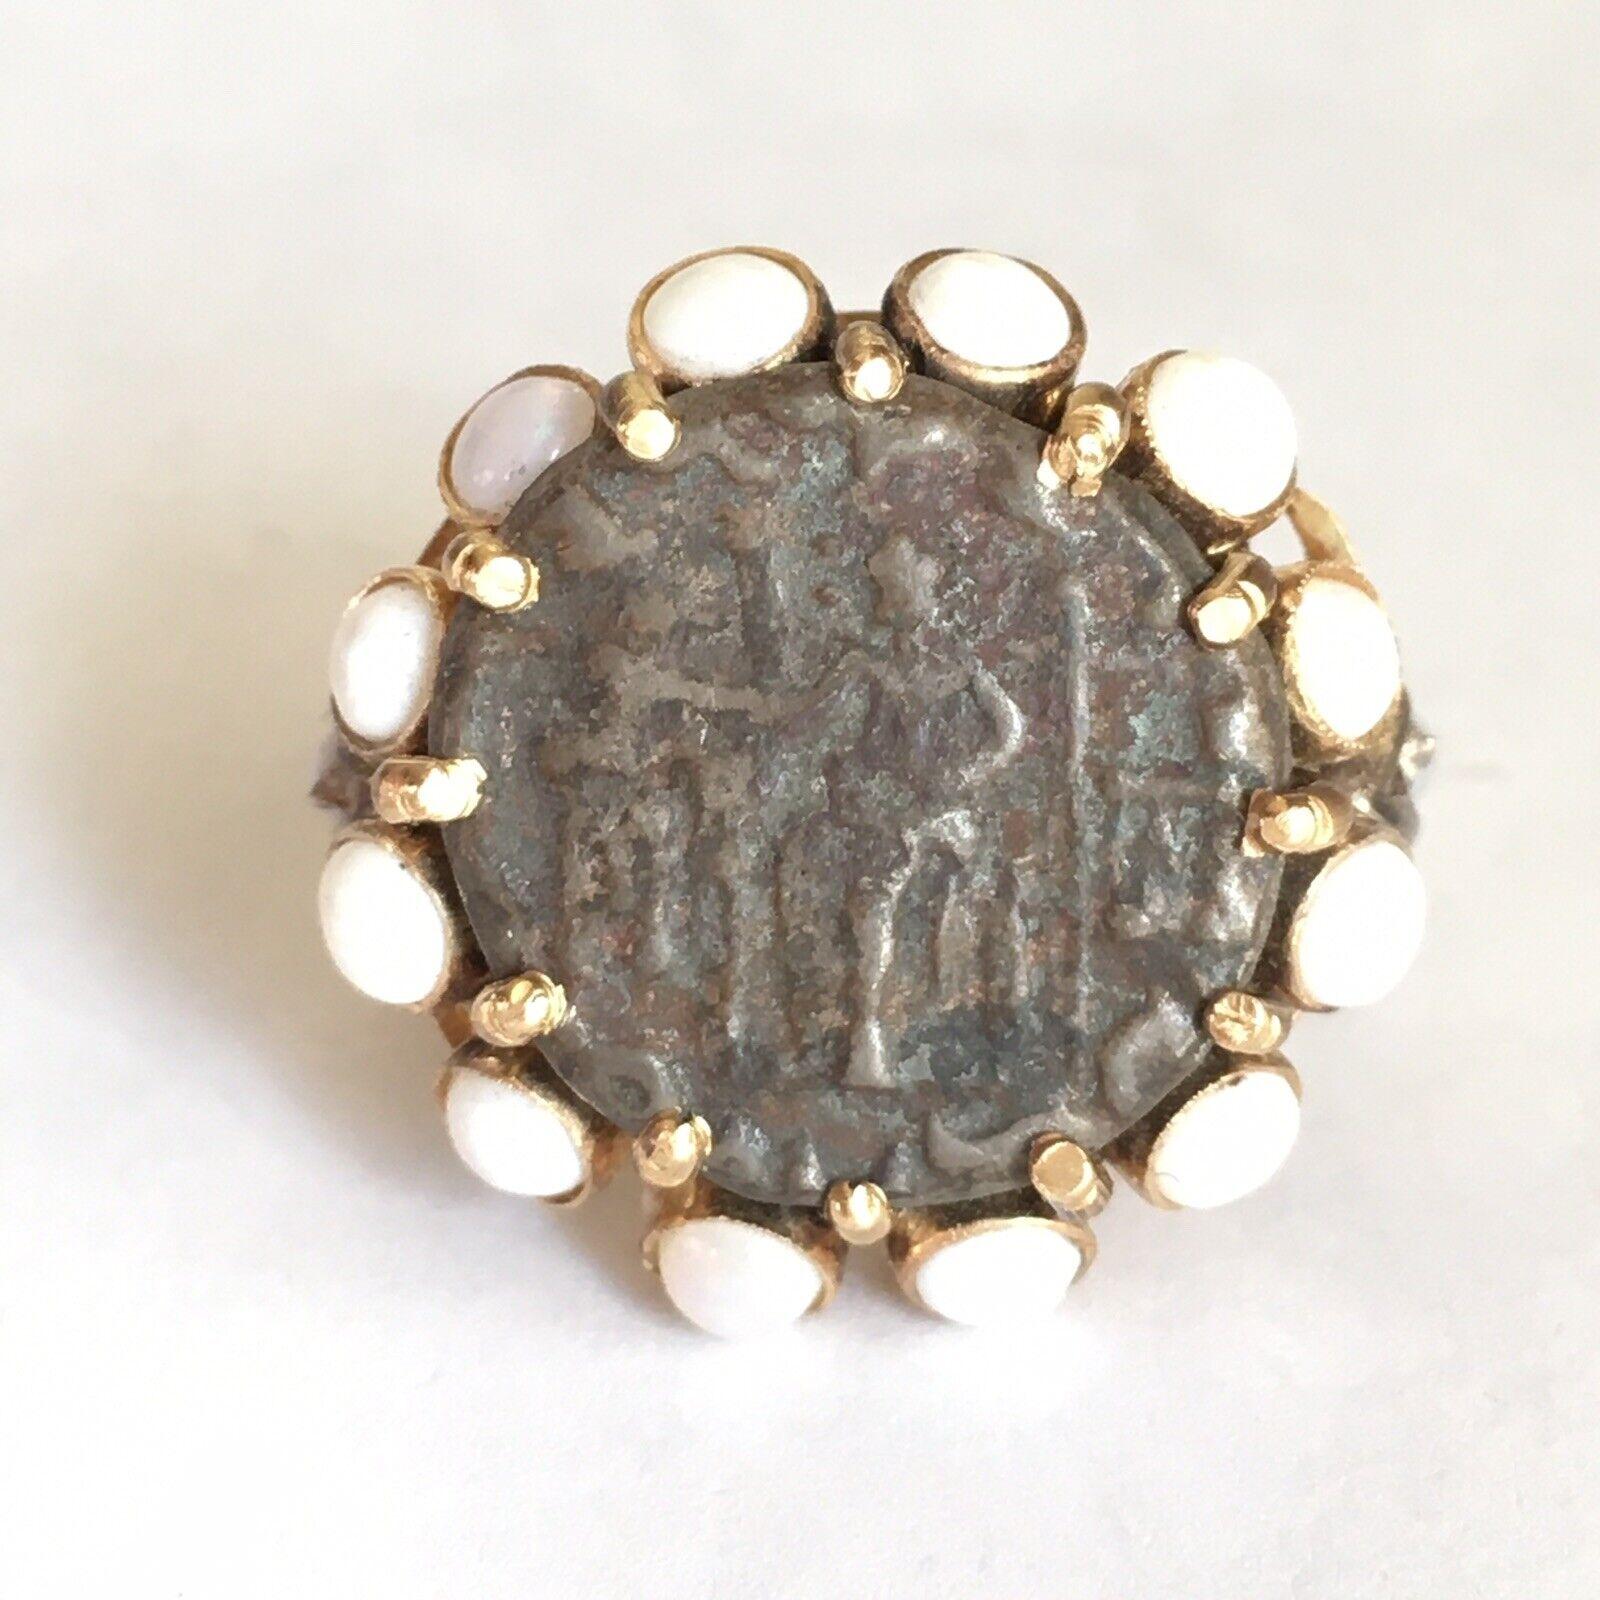 14 Karat Yellow Gold Ancient Coin Ring 
American Hallmarked 1940s
14 Karat yellow gold one 15 mm Coin ring halo,12 pieces of 2.5mm Opals, hallmarked and marked 